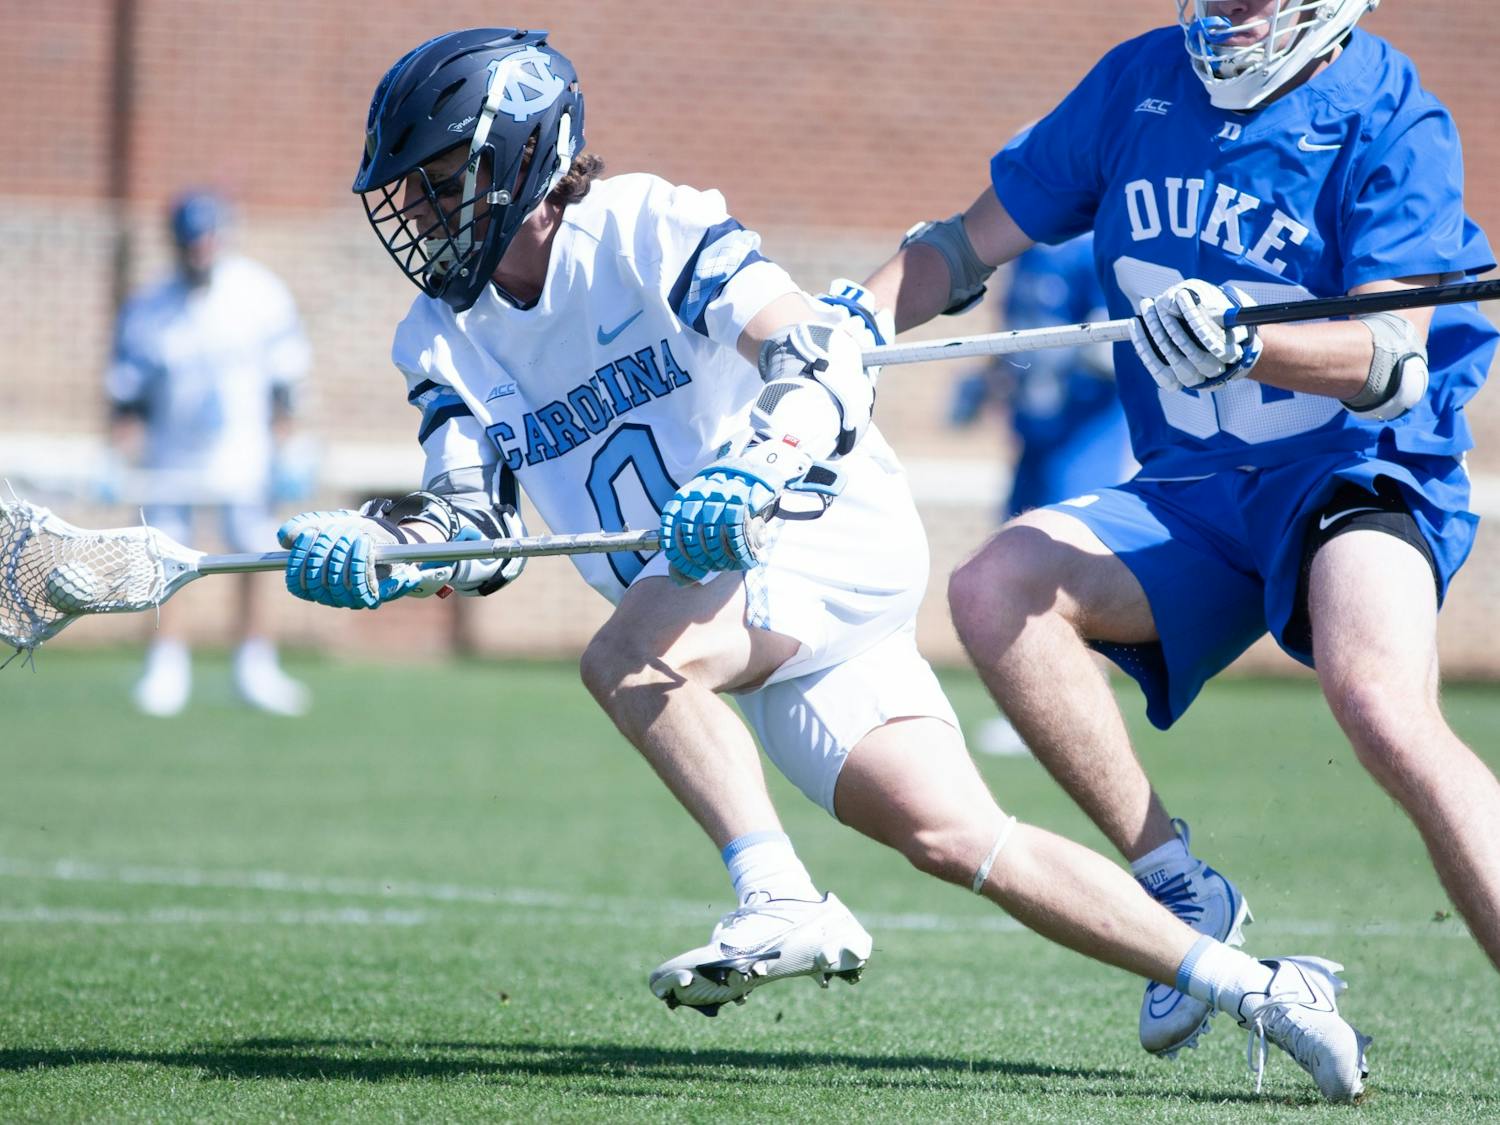 UNC junior attackman Lance Tillman (0) drives past a defender during a home game against Duke at Dorrance Field on Saturday Apr. 2, 2022.